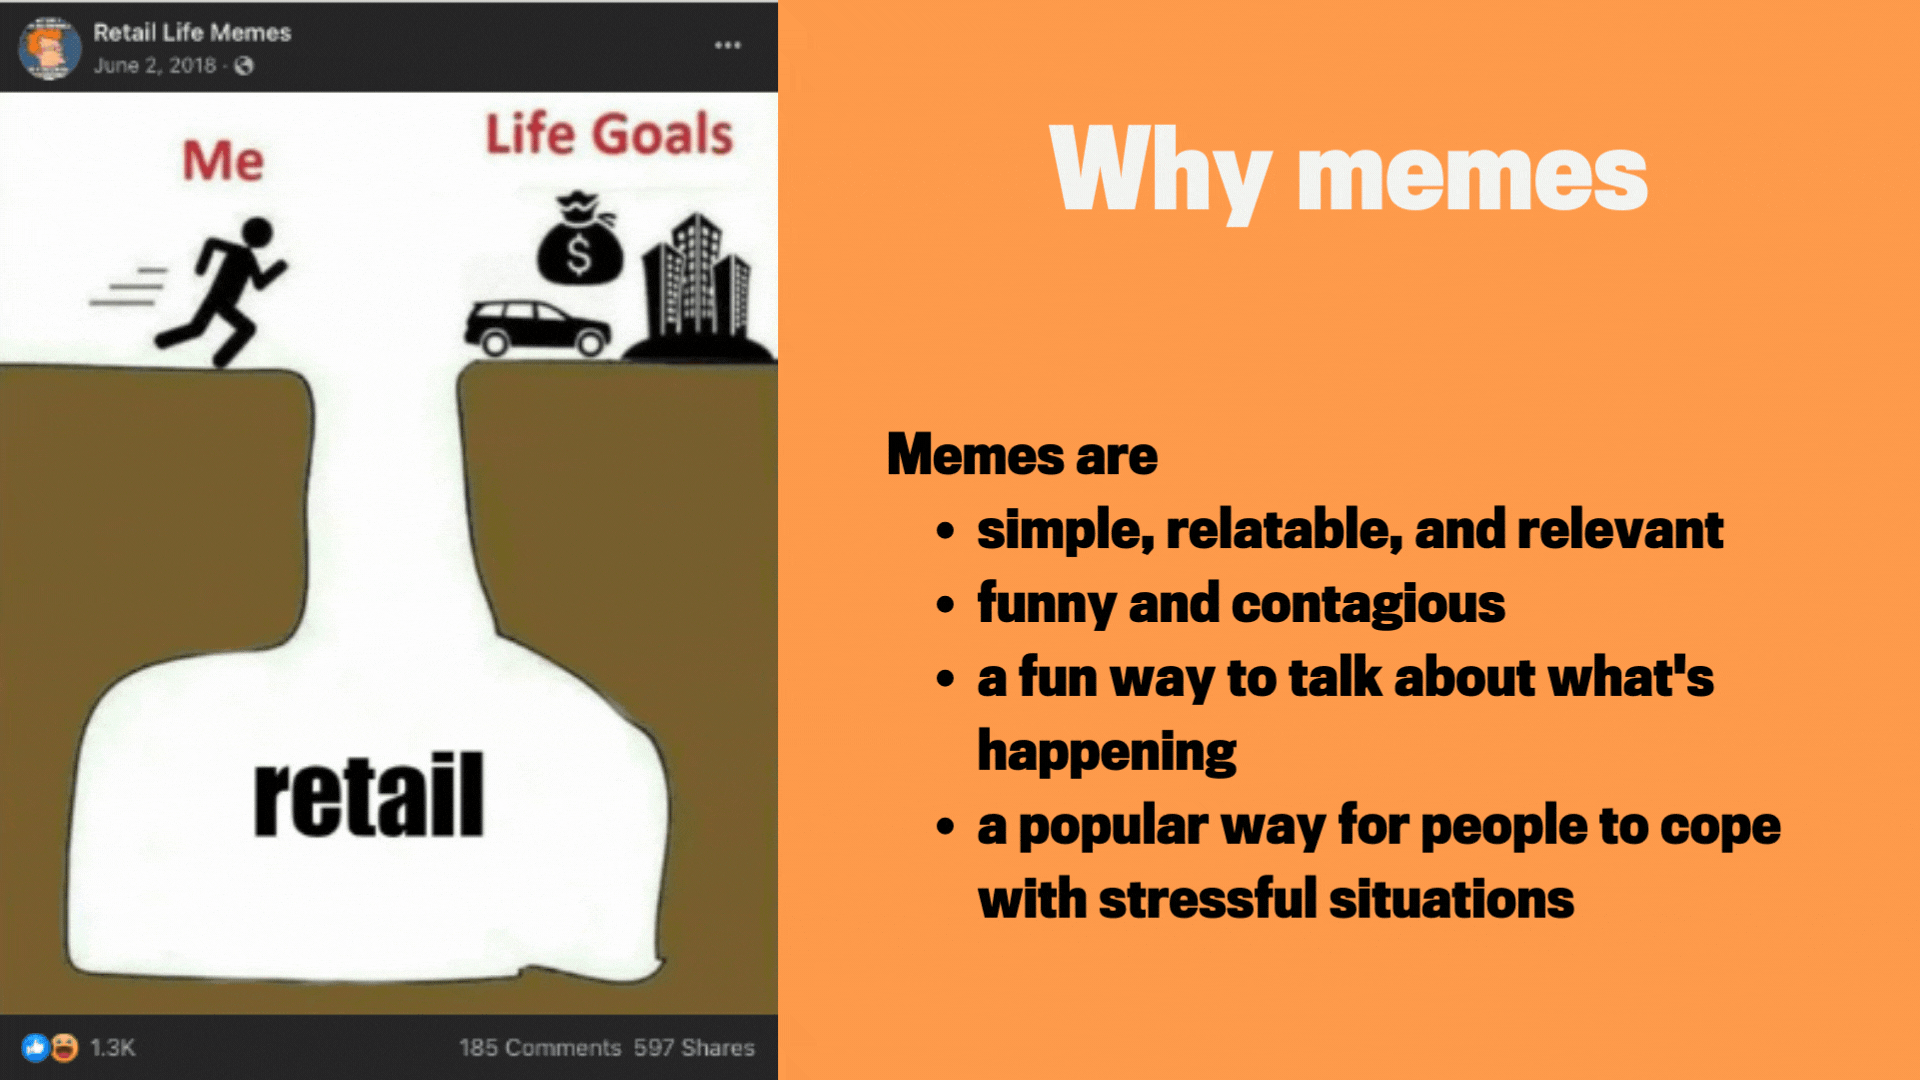 Memes are simple, funny, and a fun way to talk about what's happening